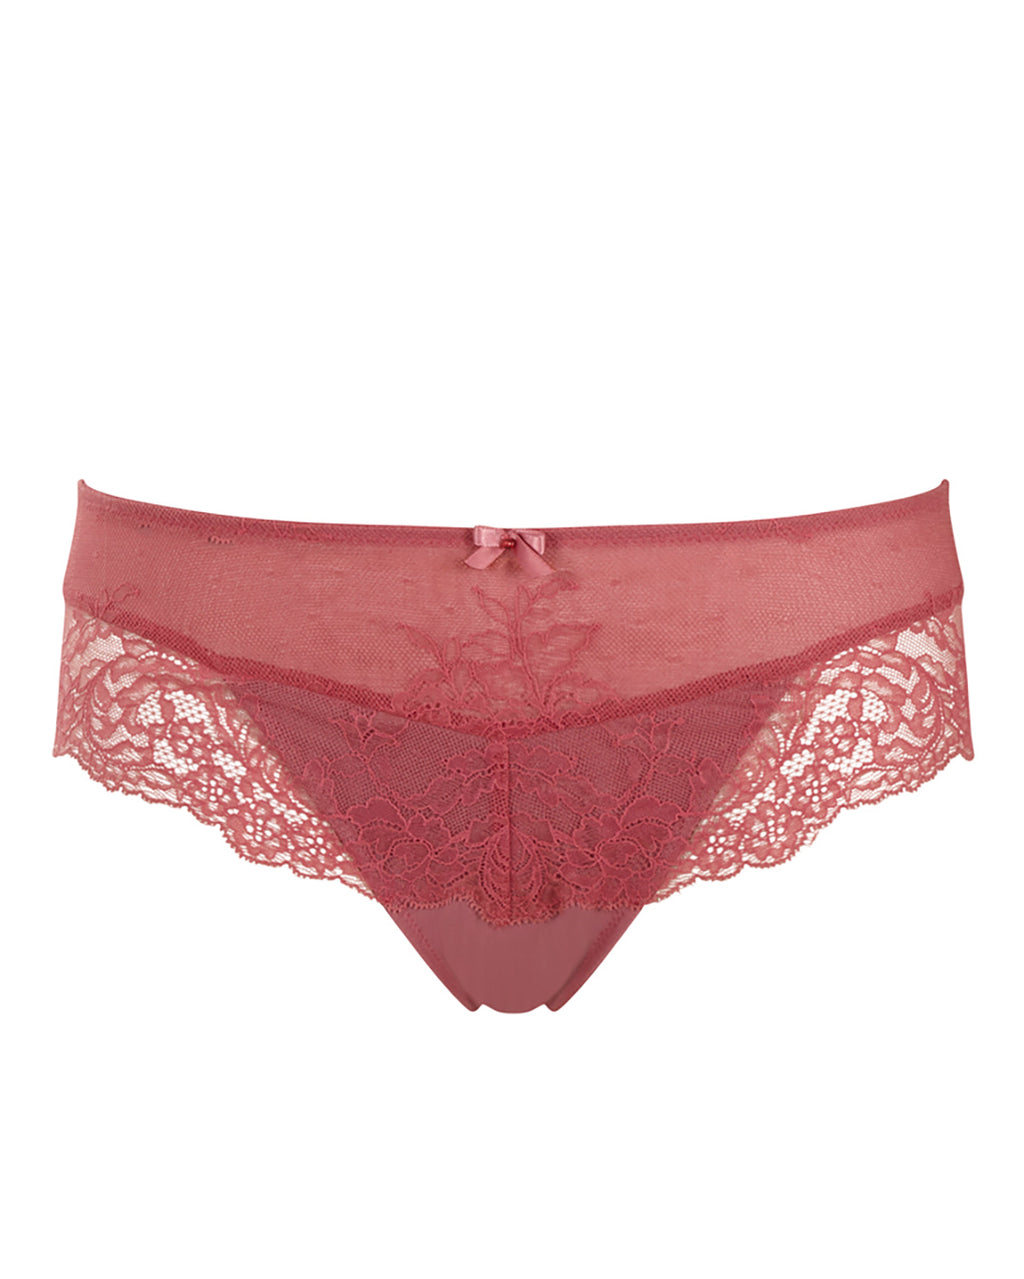 PANACHE ALLURE BRIEF  Specialty Fittings Lingerie